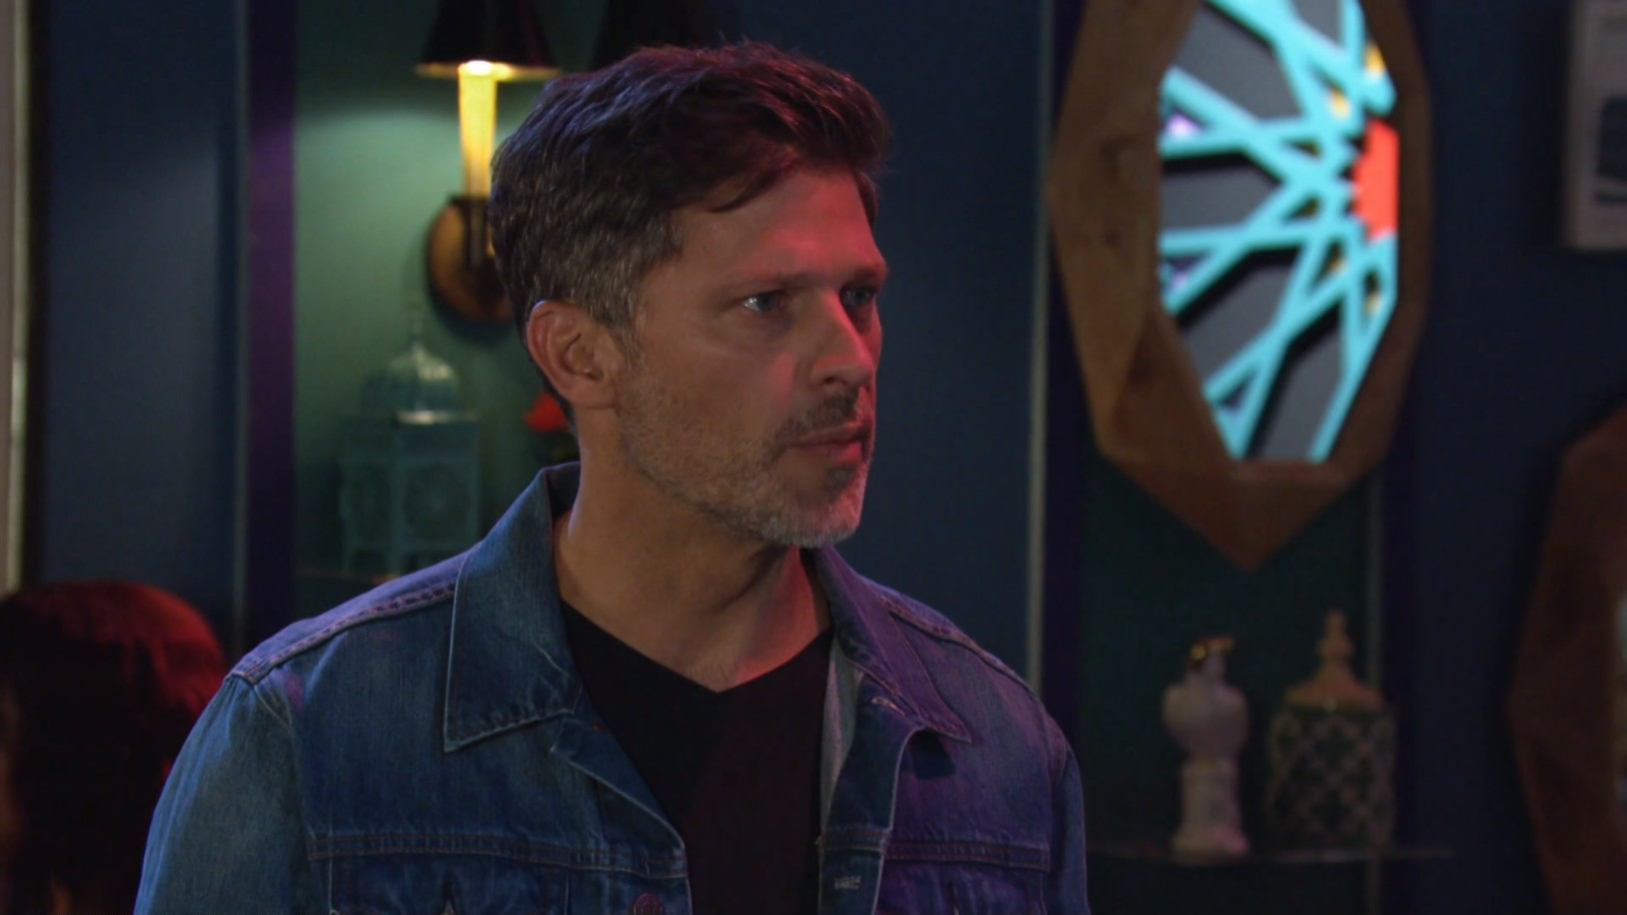 eric barks at nicole in small bar days of our lives recaps soapsspoilers